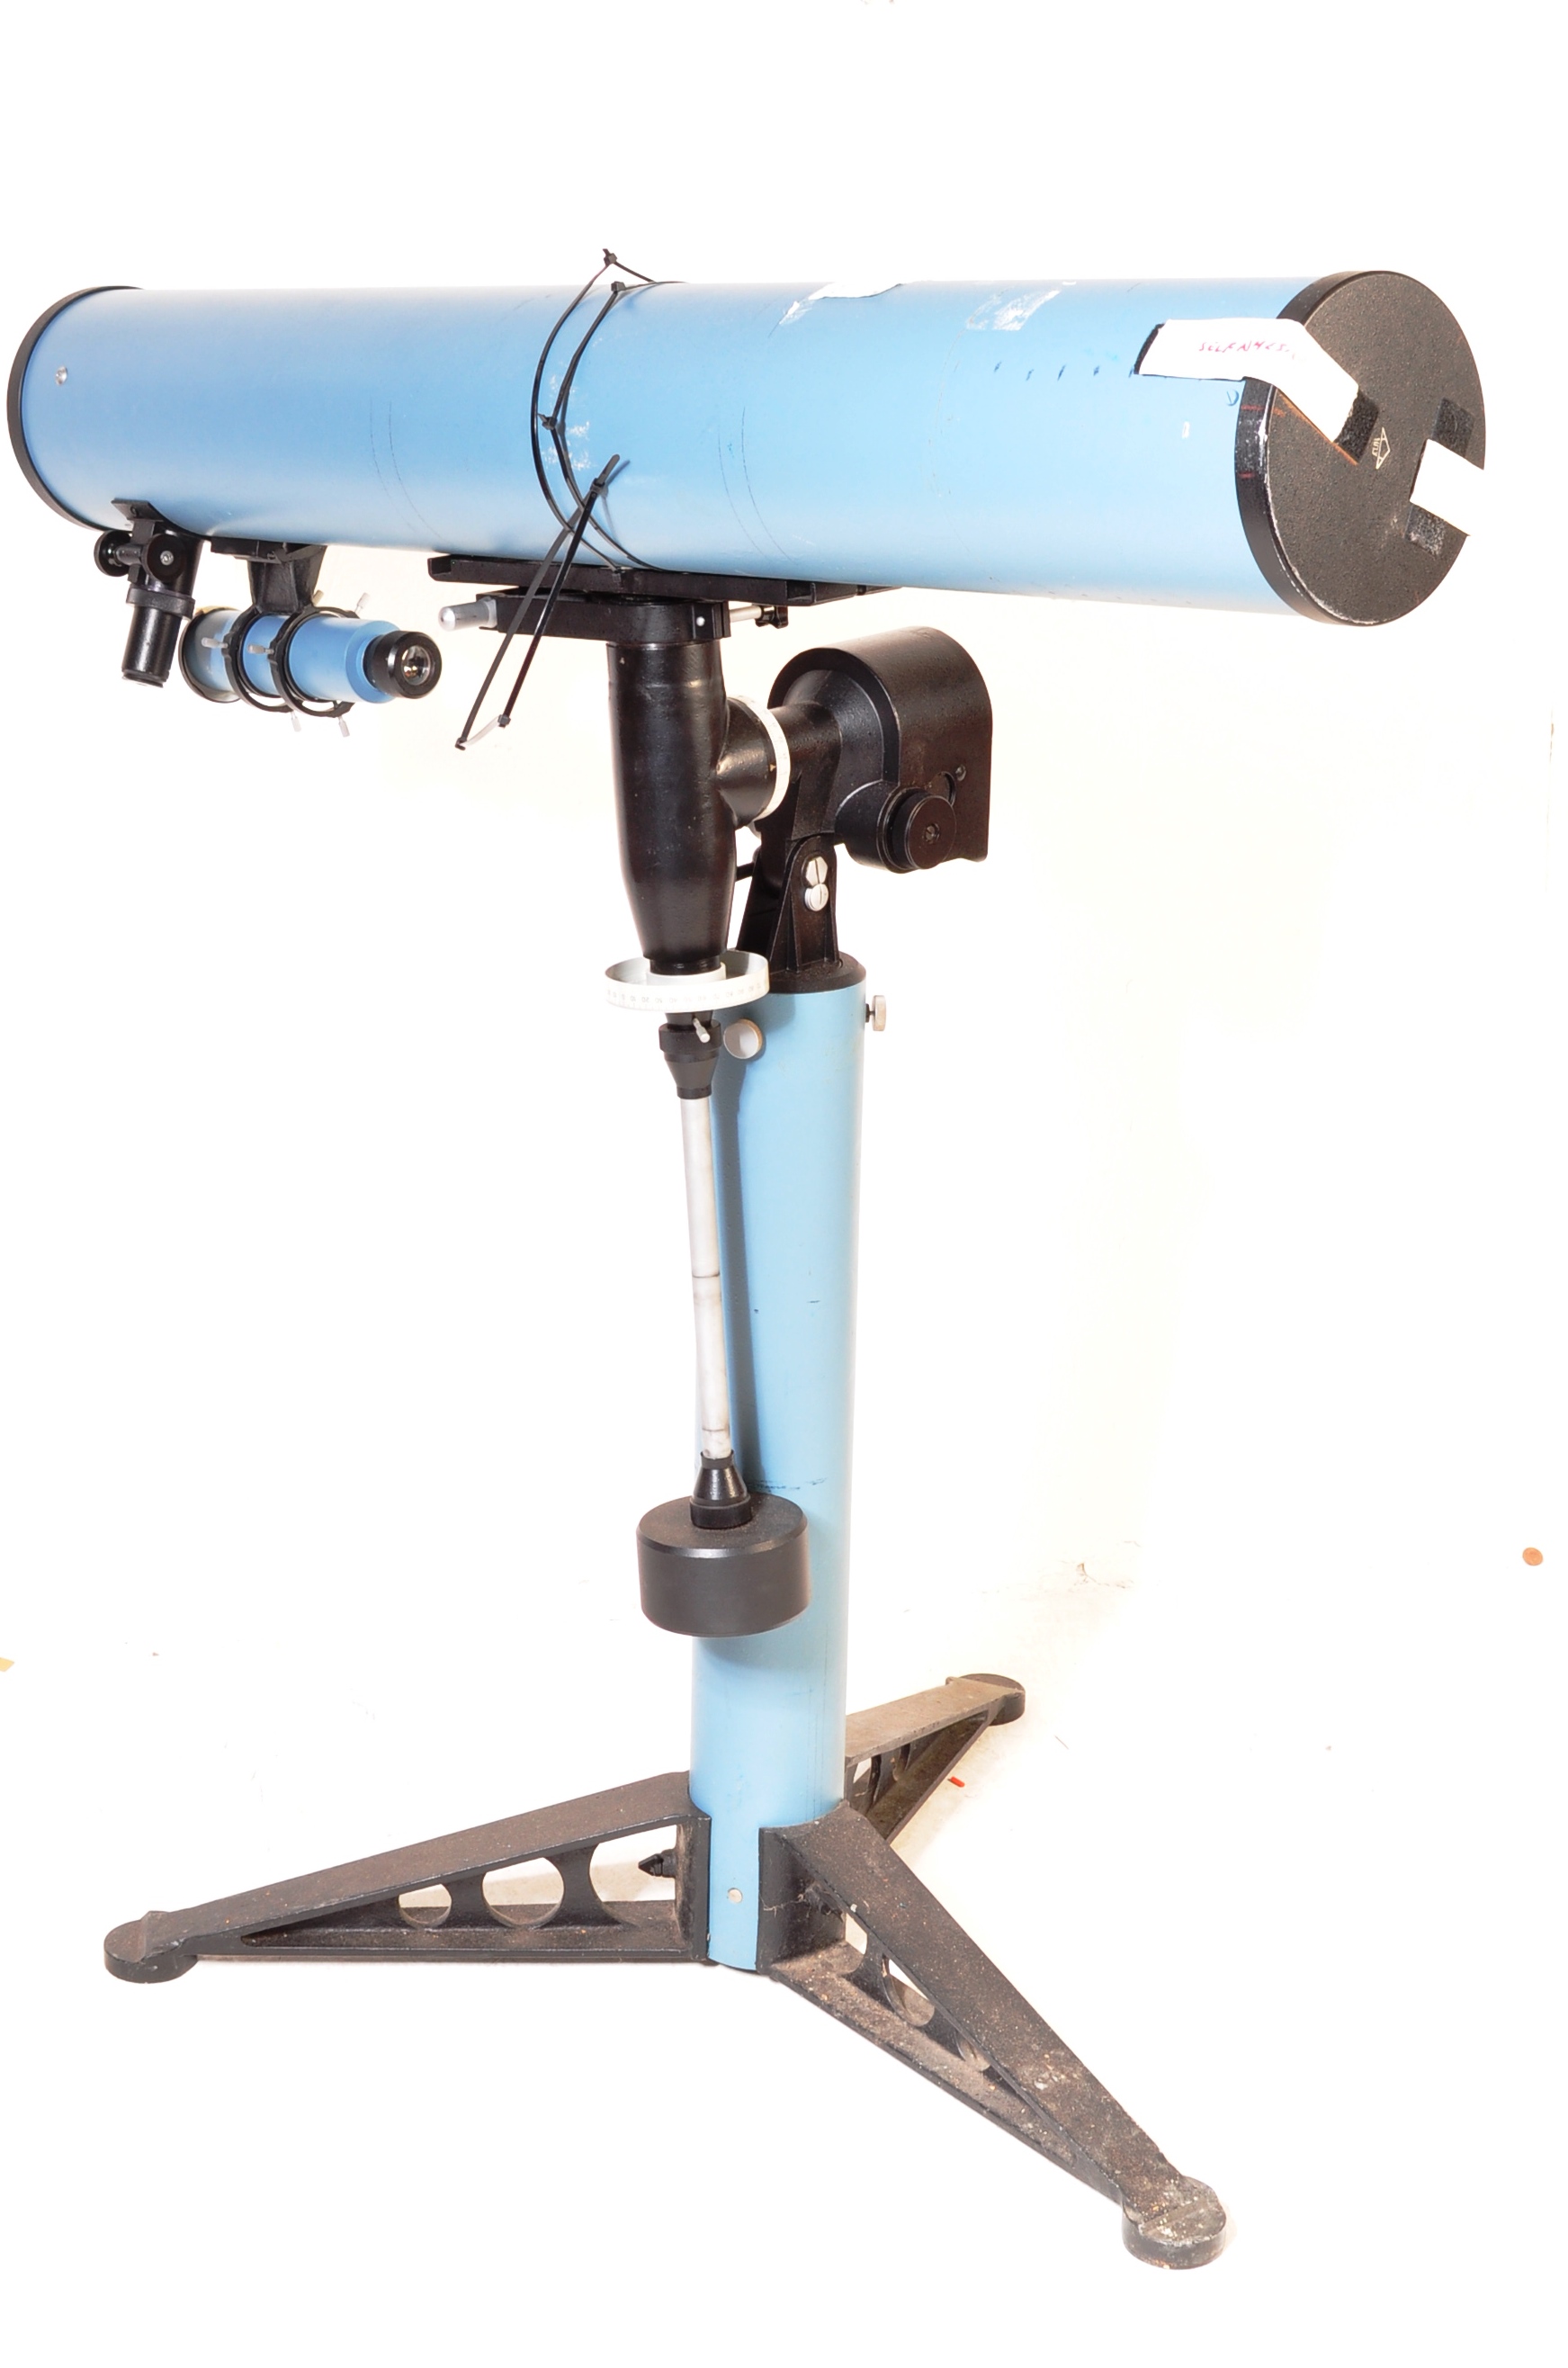 LATE 20TH CENTURY RUSSIAN ASTRONOMICAL TELESCOPE - Image 2 of 11